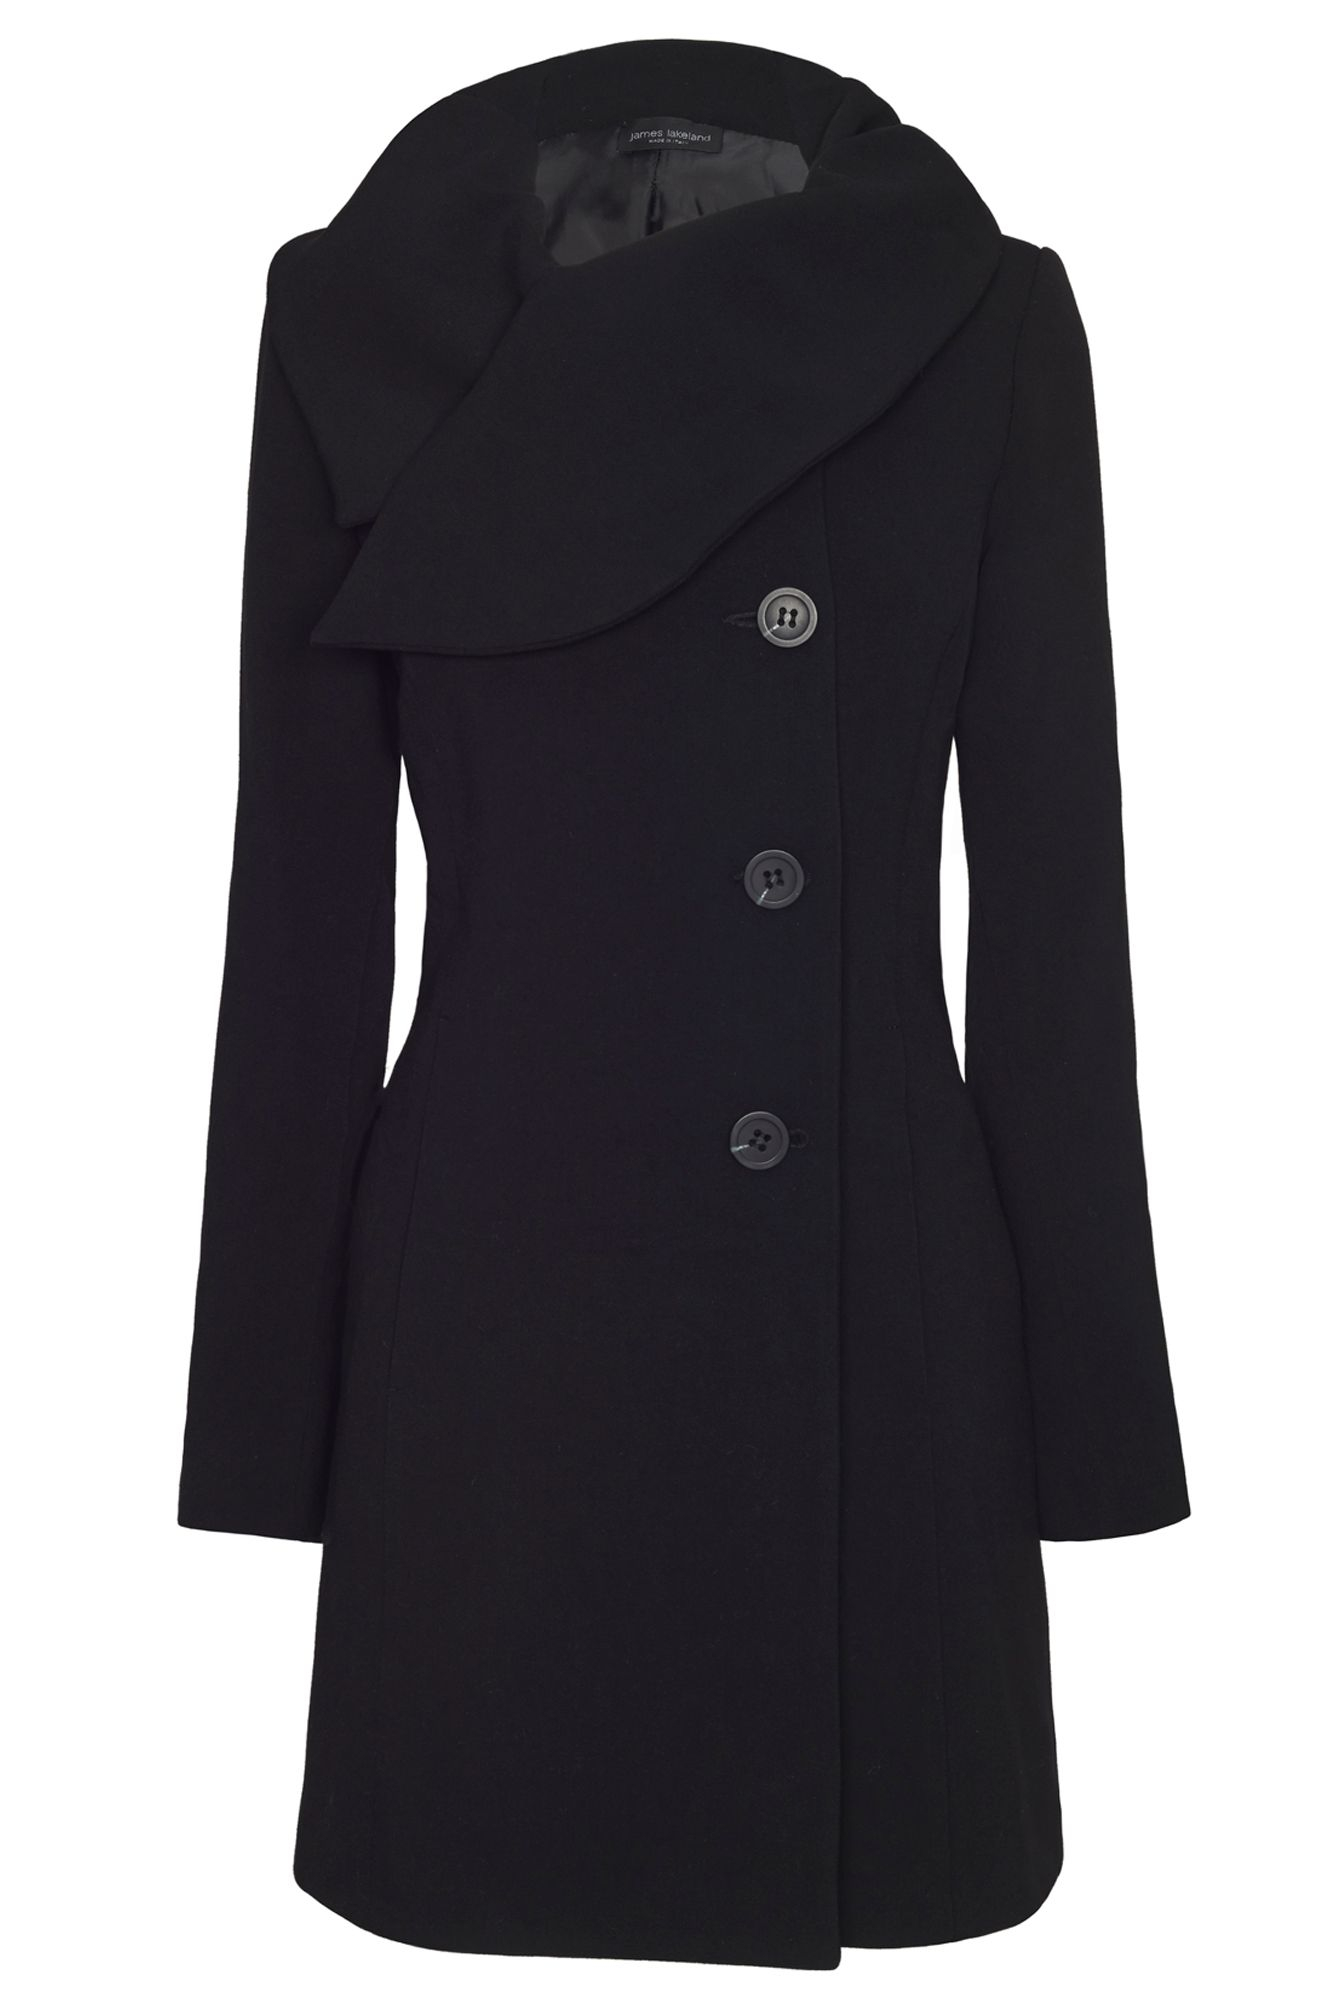 James Lakeland Tailored Coat with Big Collar in Black | Lyst